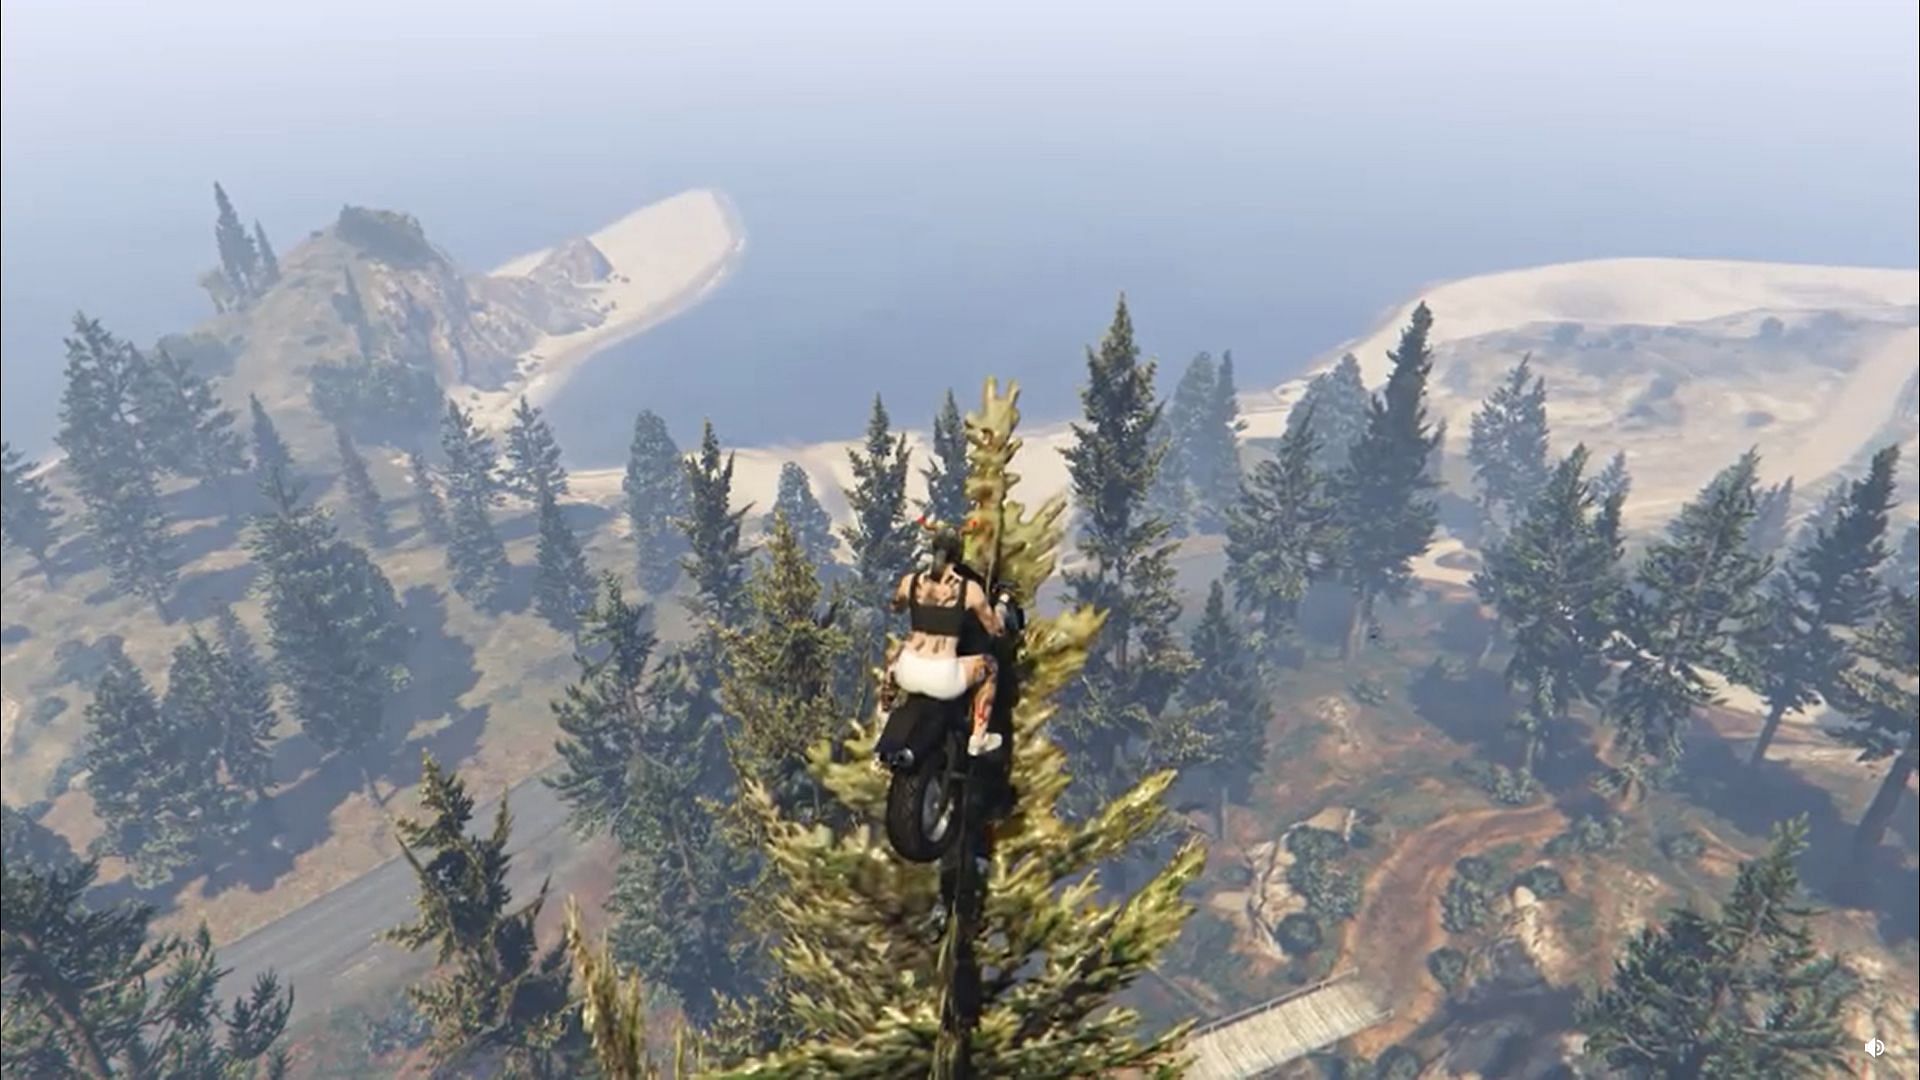 GTA Online player just casually sitting atop a tree on a motorbike (Image via Sportskeeda)